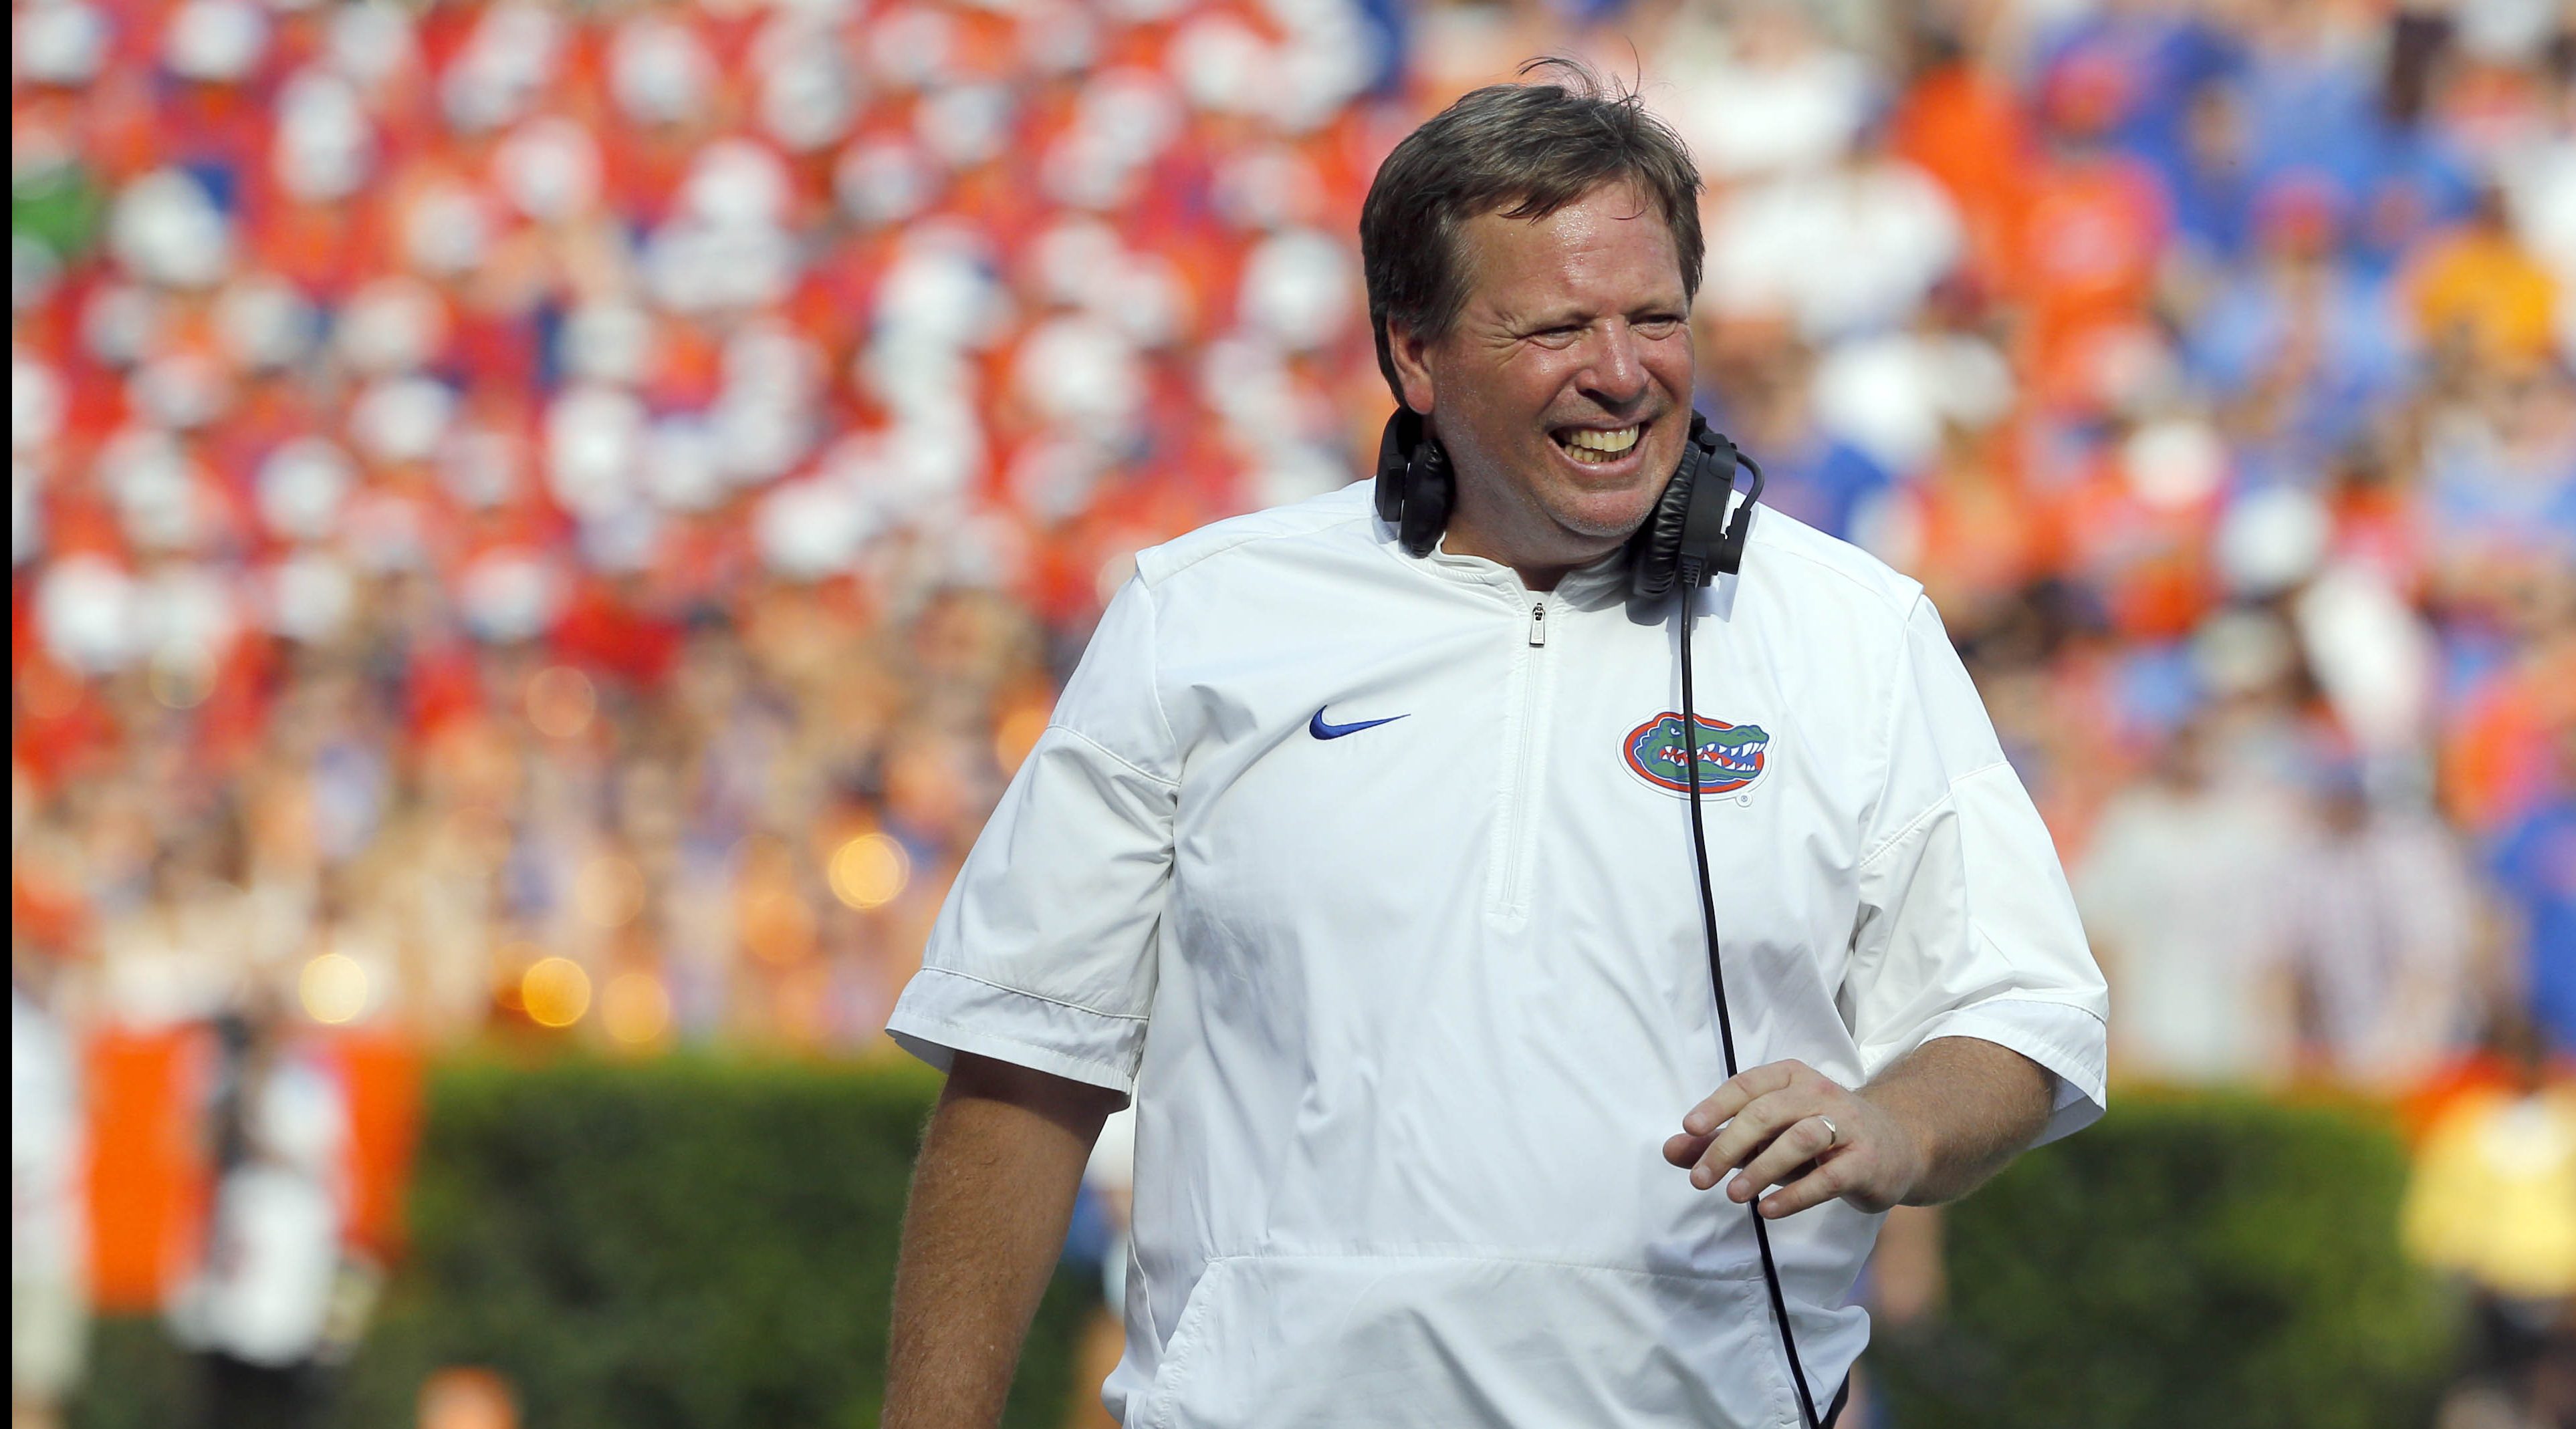 Florida and Head Football Coach Jim McElwain Agree to Part Ways - ESPN